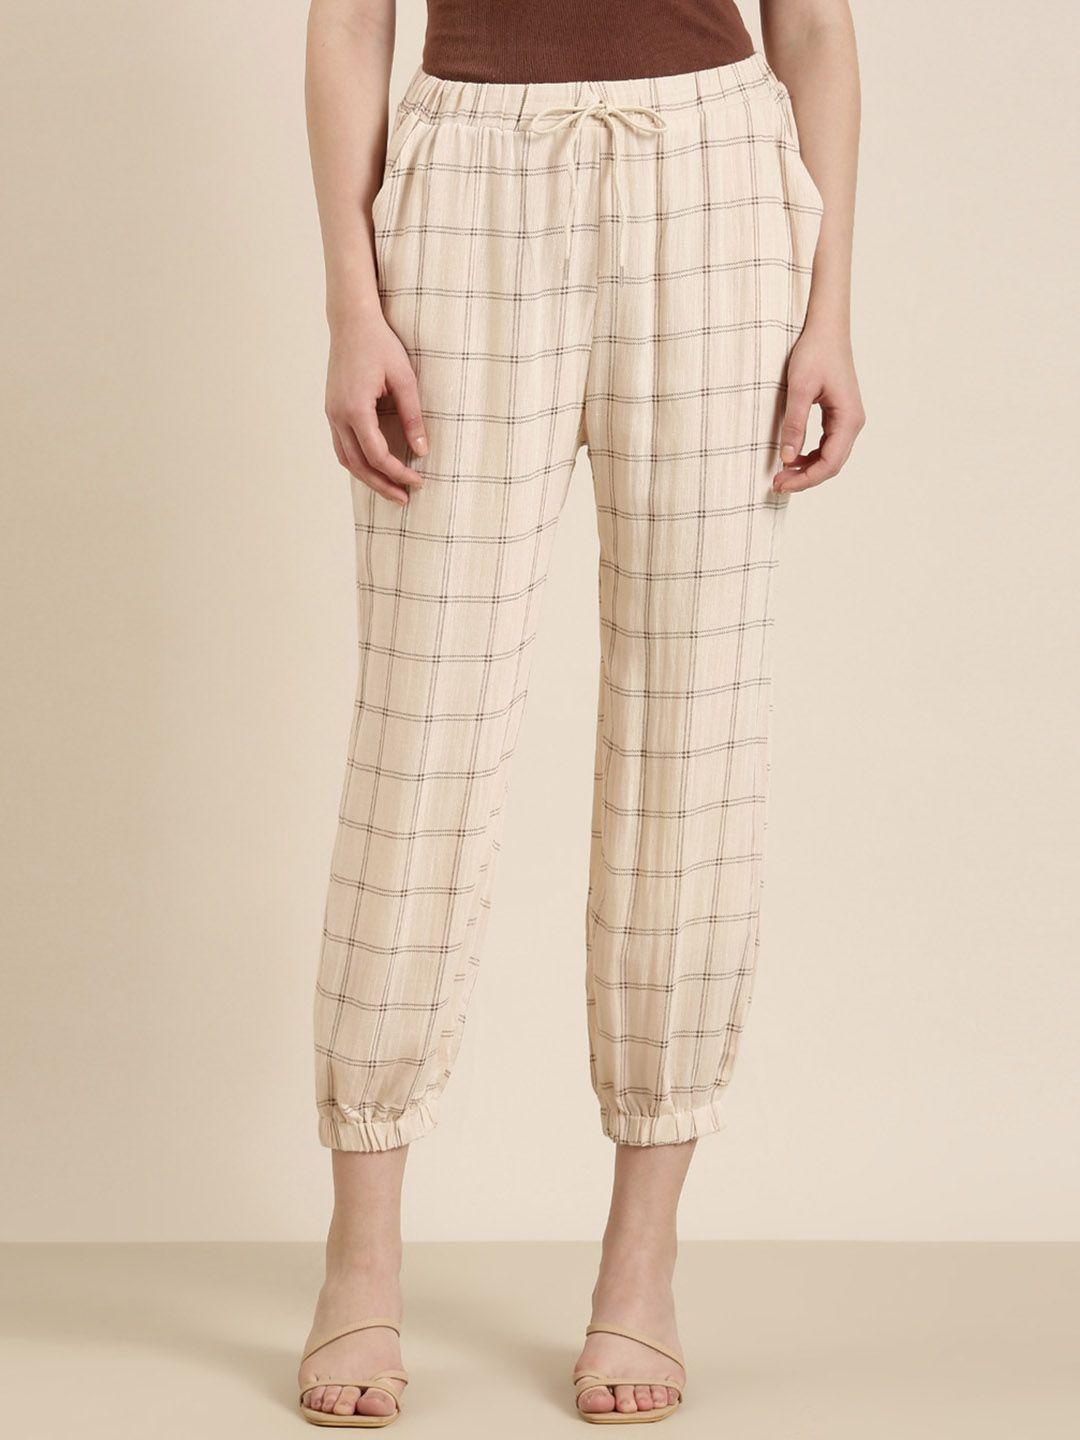 showoff-women-cream-coloured-checked-relaxed-flared-high-rise-joggers-trousers